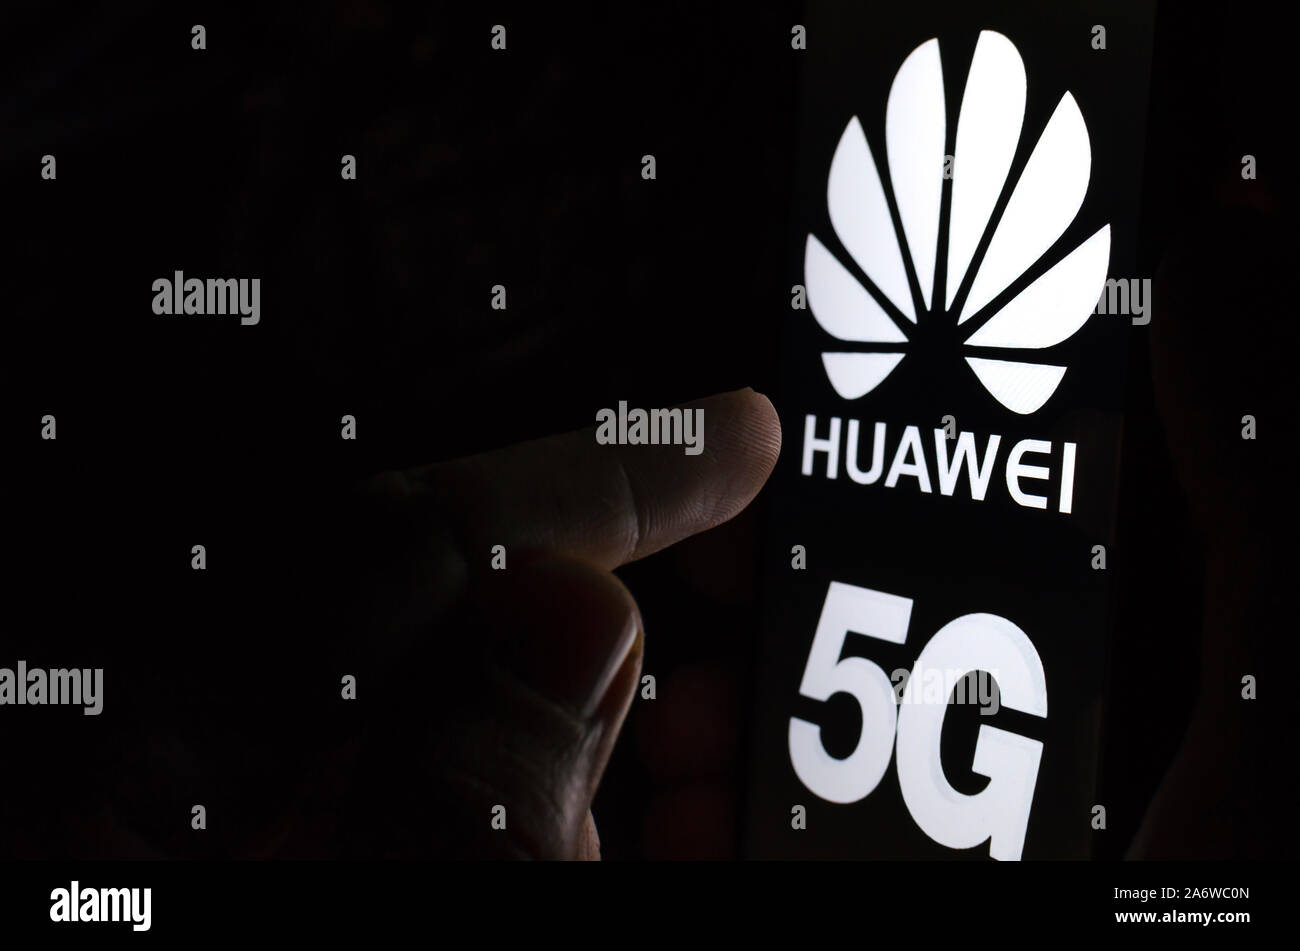 Huawei 5G logo on a smartphone screen in a dark room and a finger touching it. Stock Photo